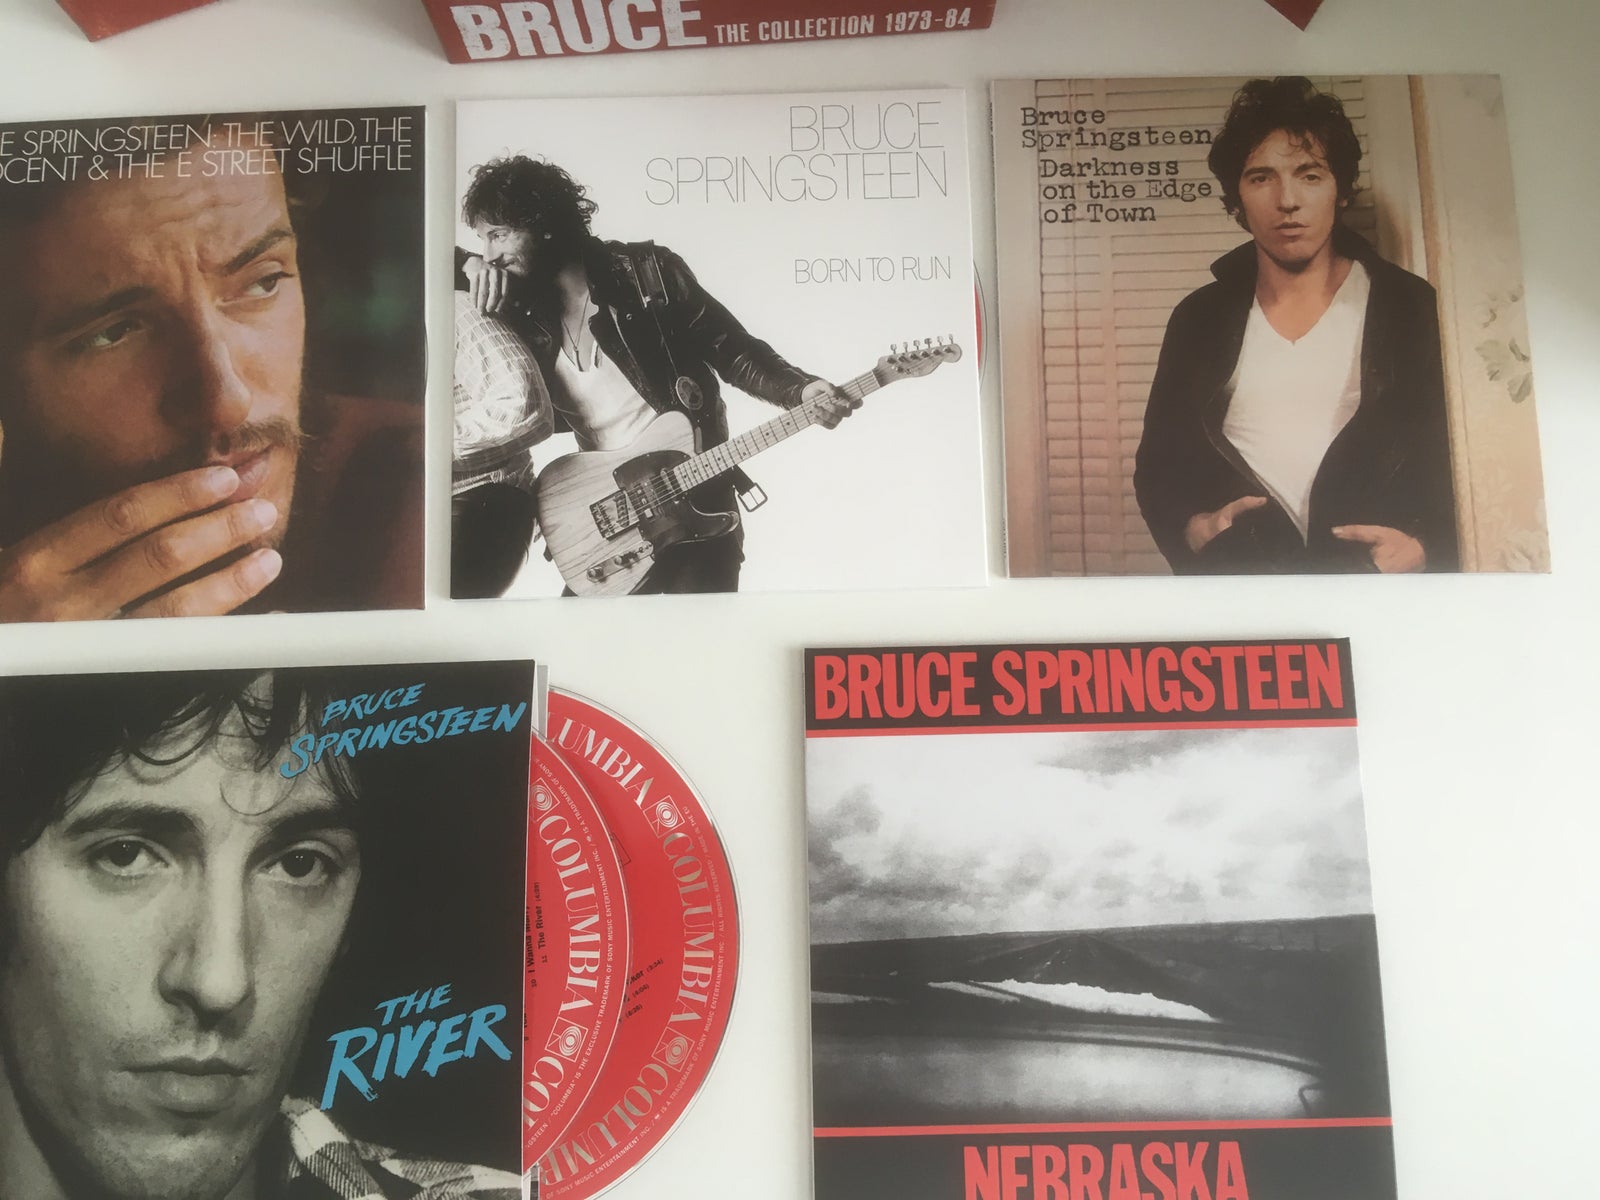 bruce springsteen the collection 1973-84 box boks: bruce